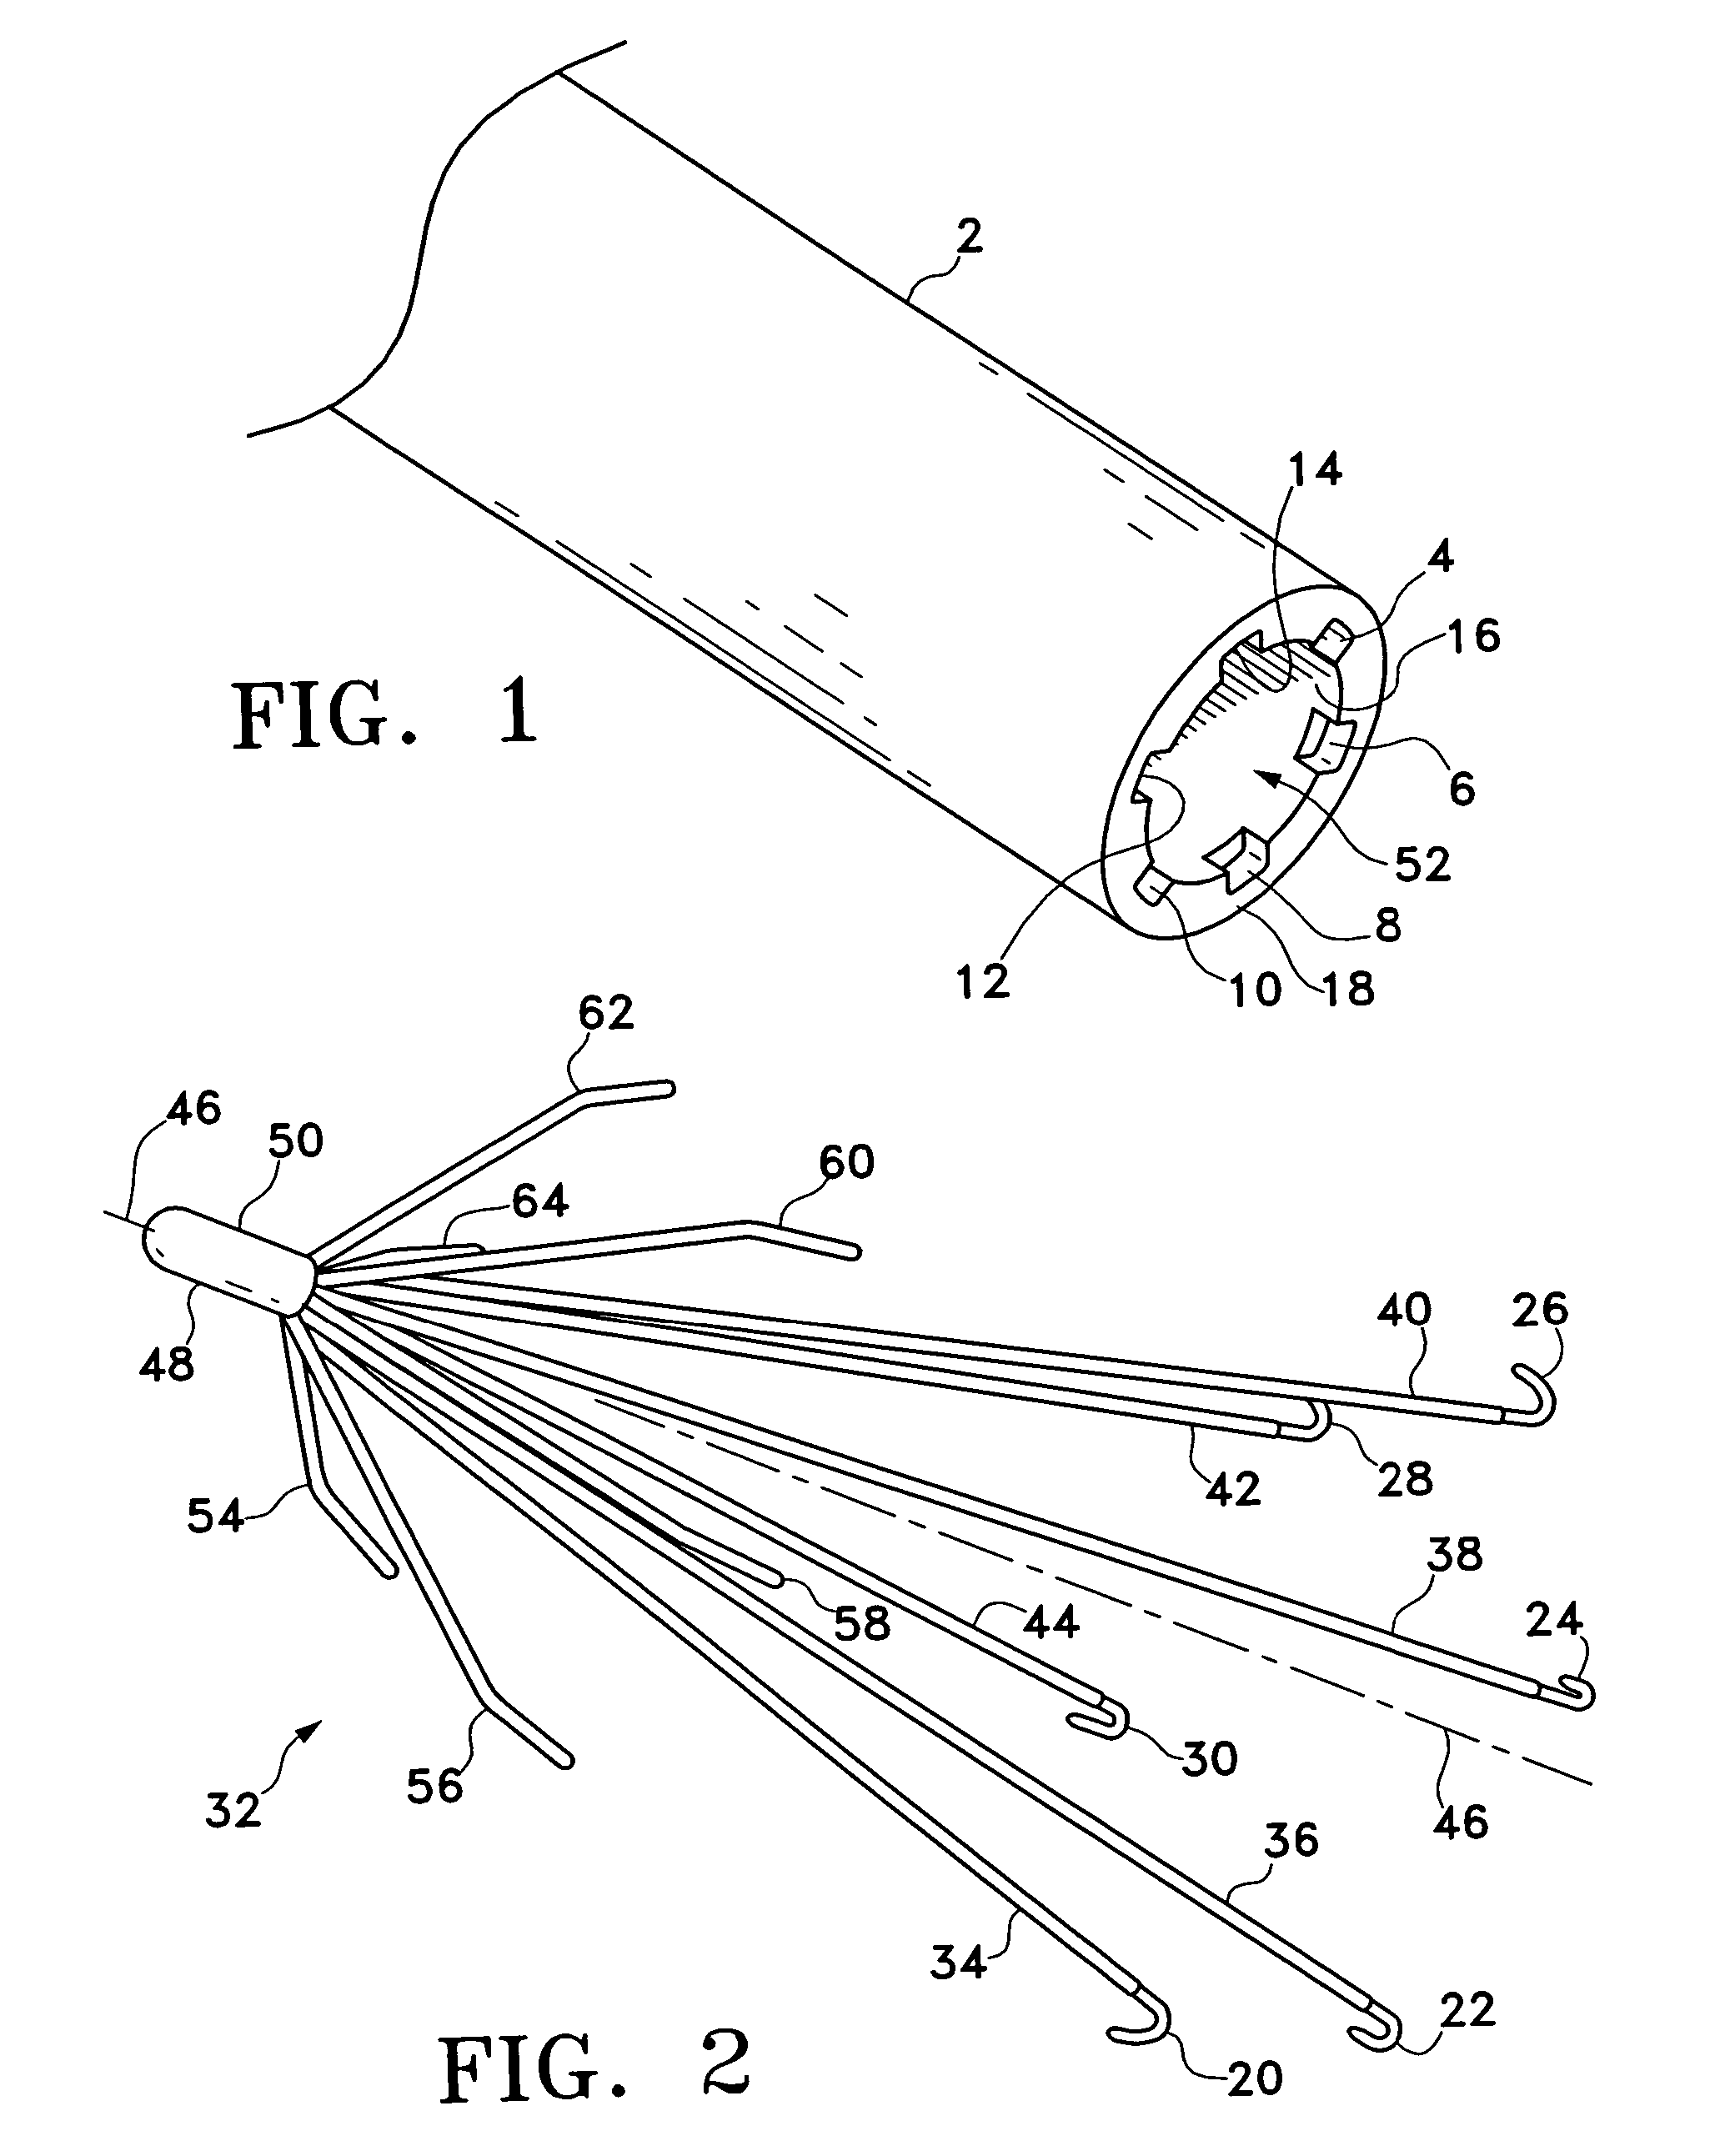 Filter delivery system